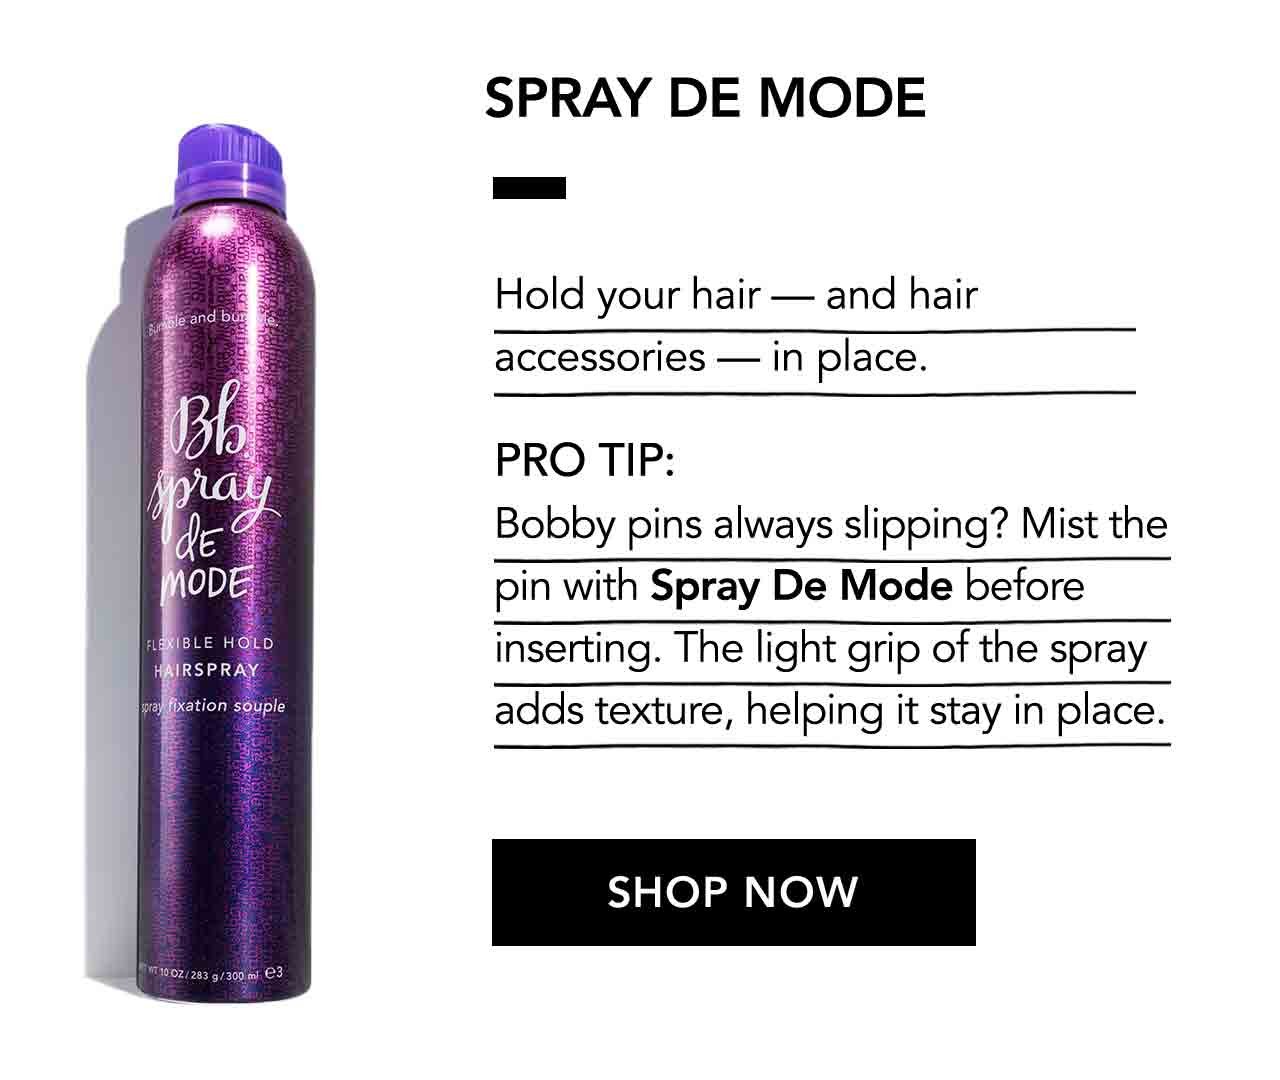 SPRAY DE MODE | Hold your hair - and hair accessories in place. | PRO TIP: Bobby pins always slipping? Mist the pin with Spray De Mode before inserting. The light grip of the spray adds texture, helping it stay in place. | SHOP NOW